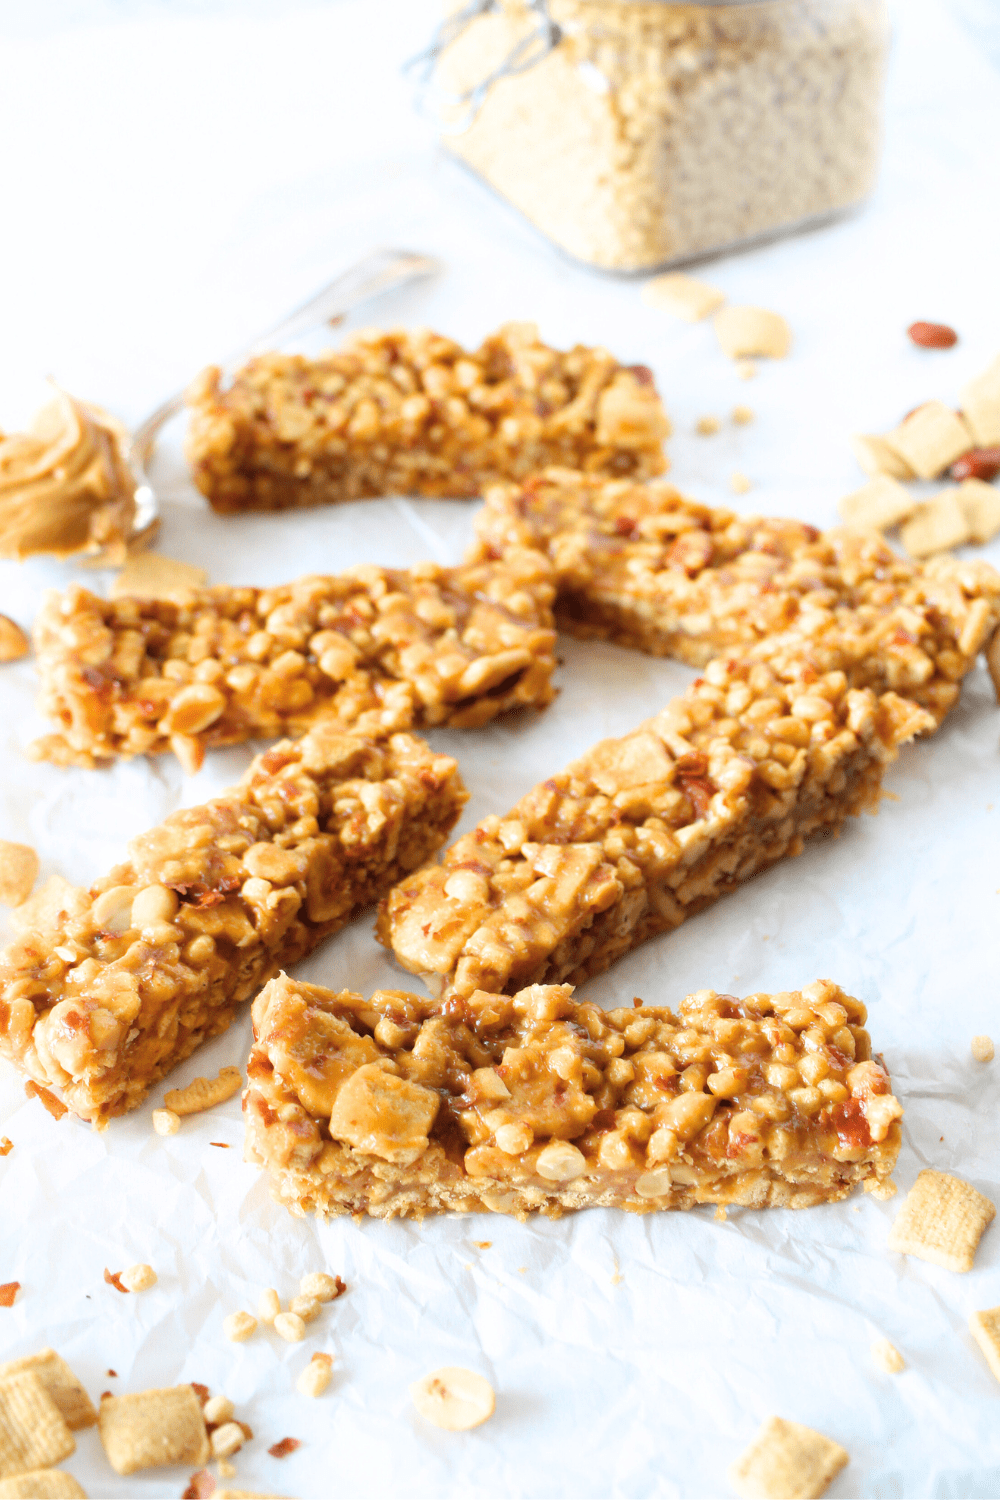 sugar-free no-bake bars with peanut butter and cereal